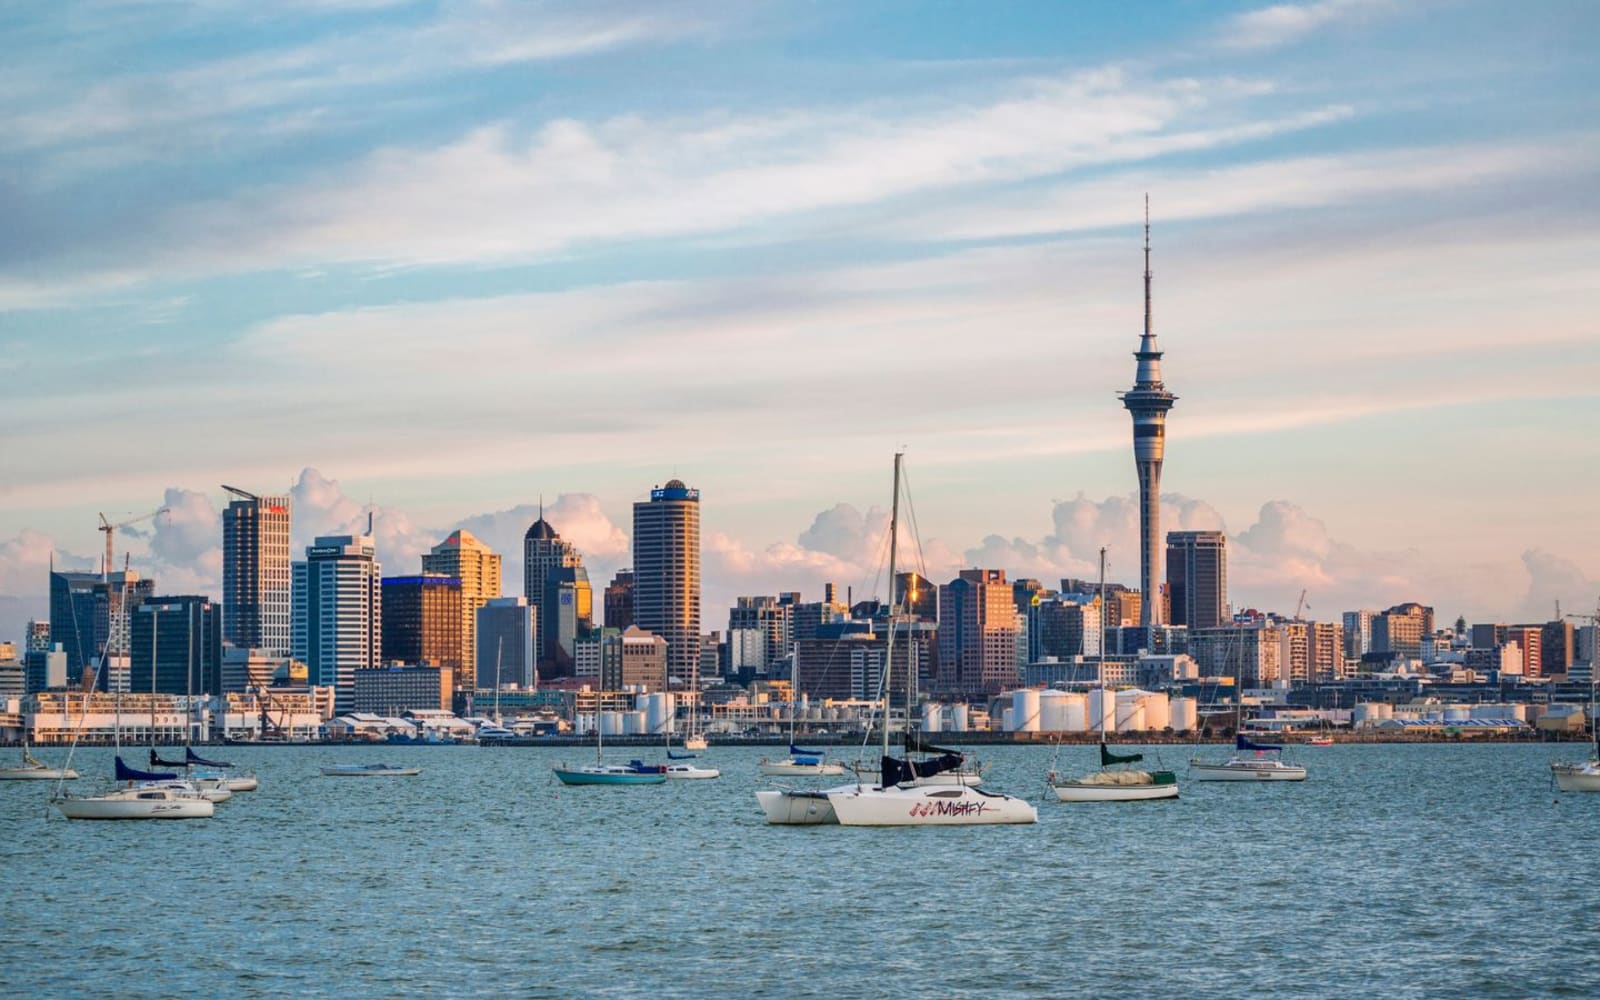 Looking at the Auckland city skyline from the water